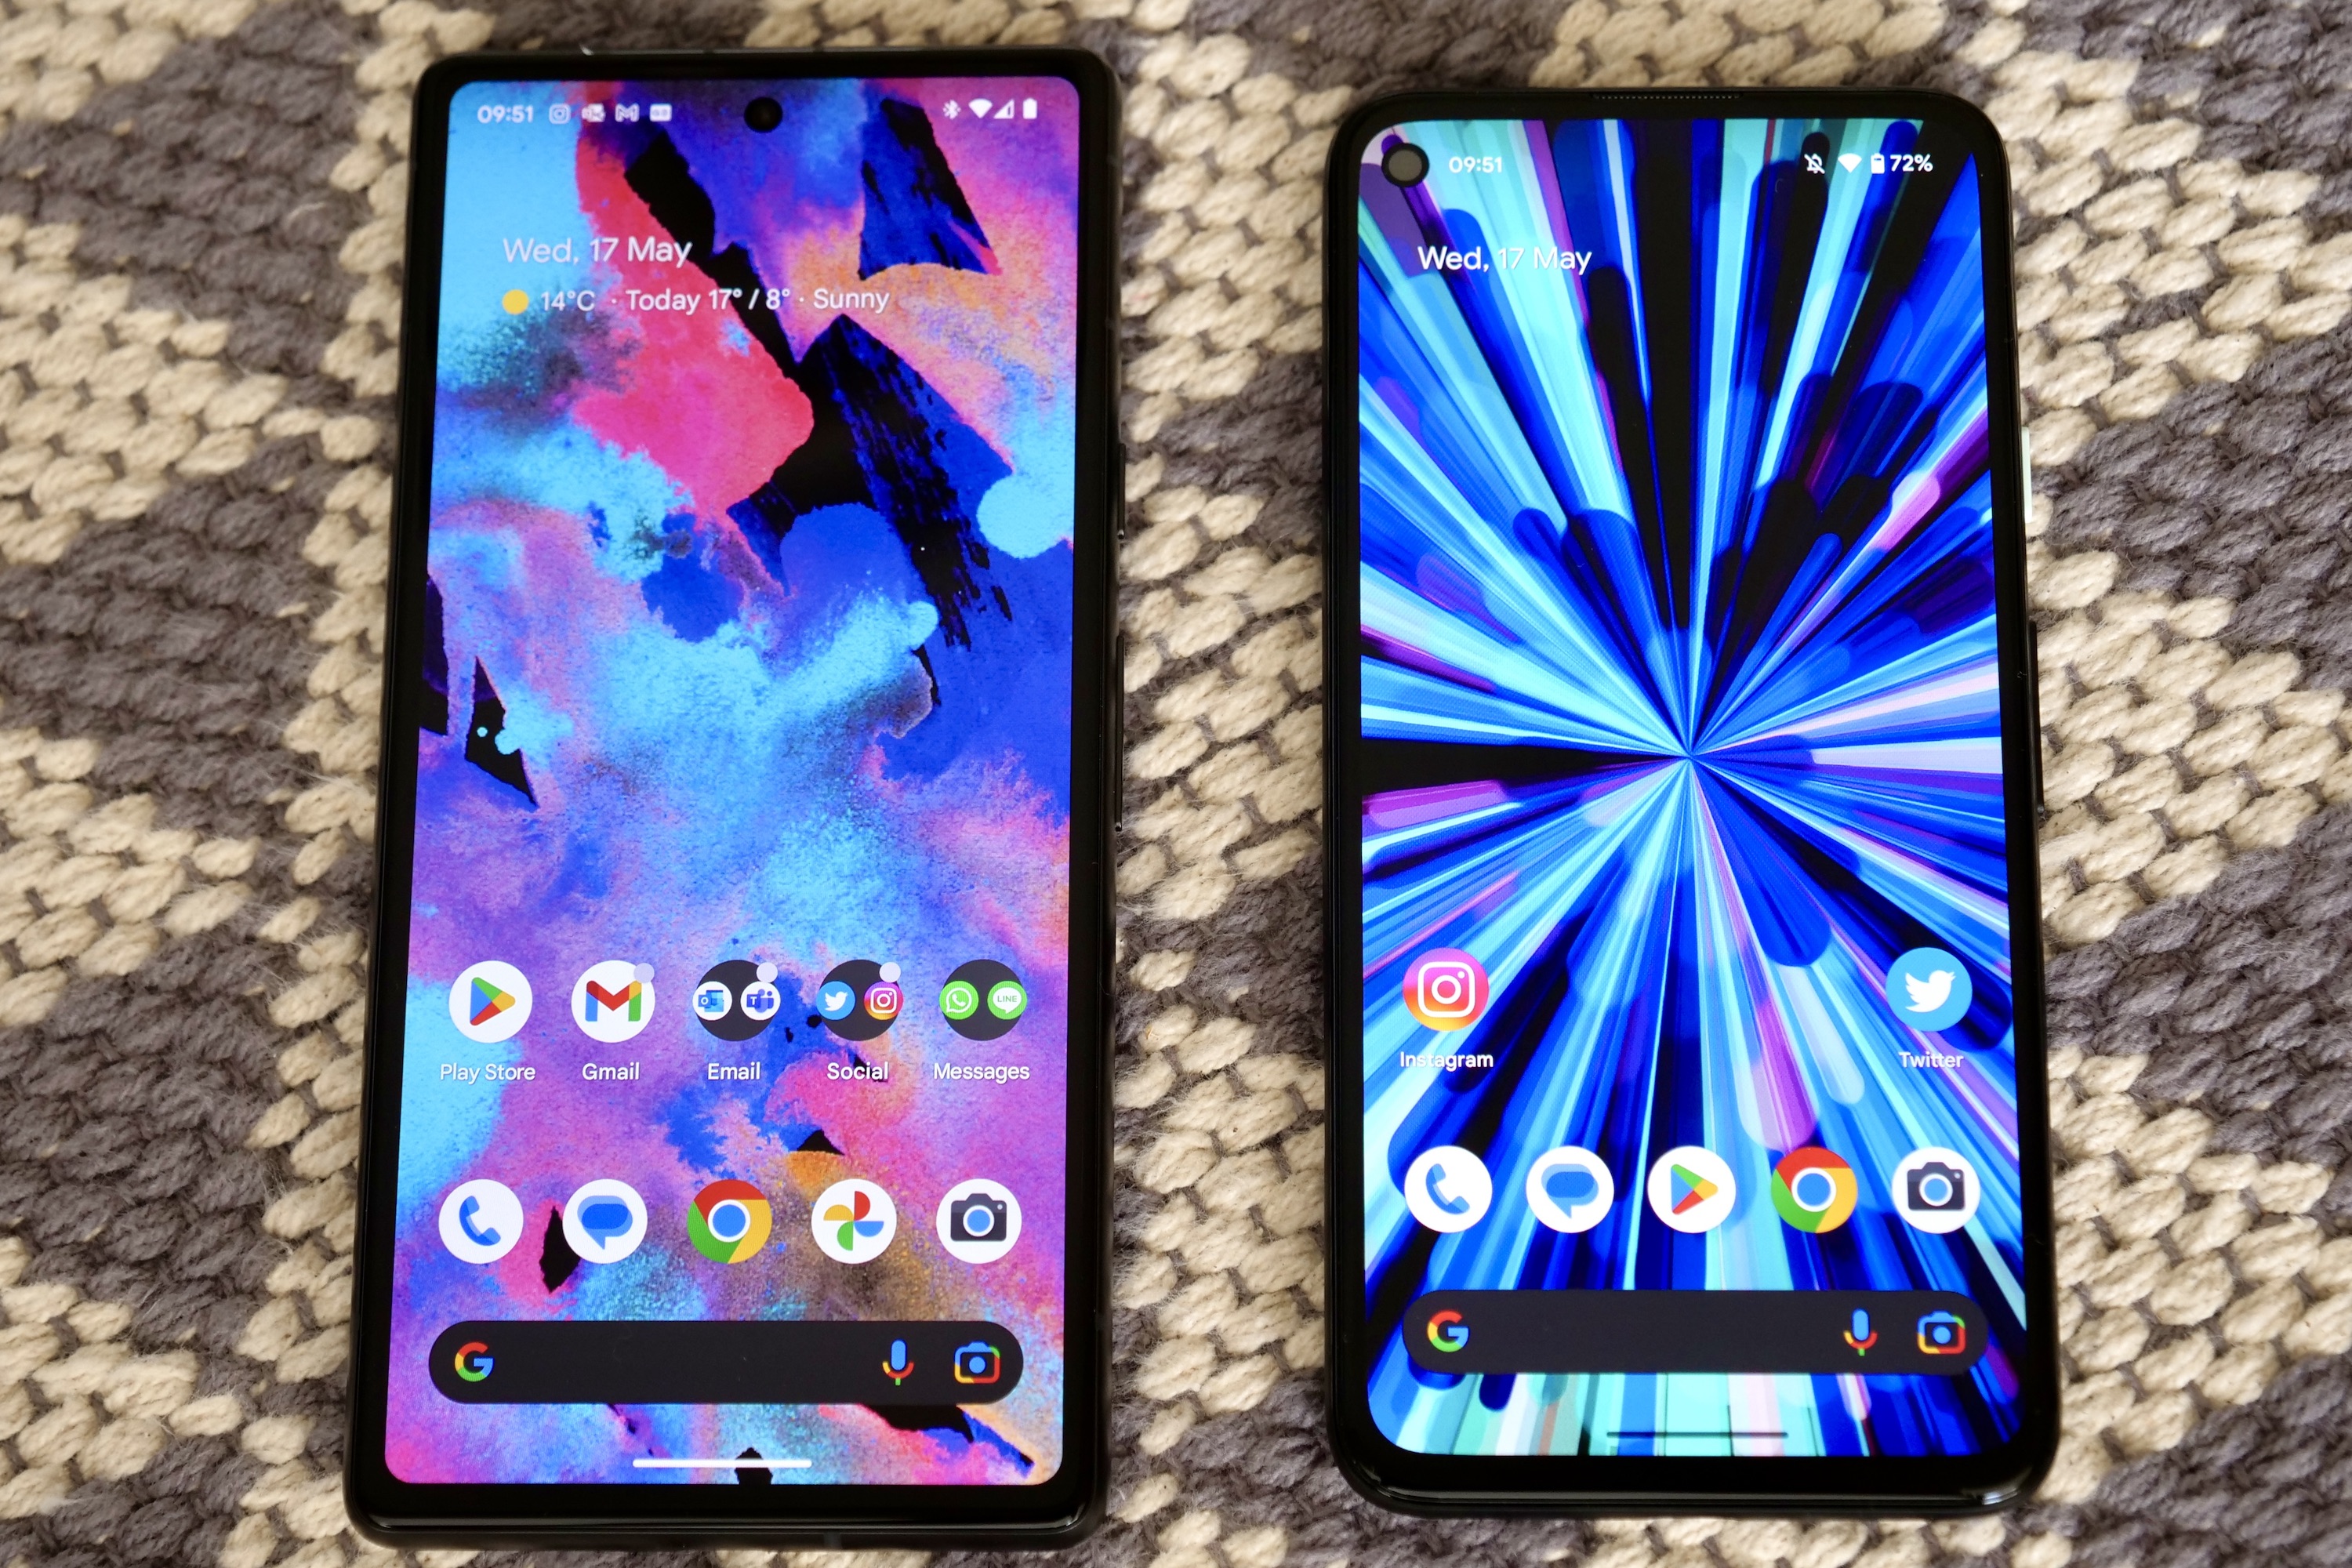 The Pixel 7a and Pixel 4a's screens.